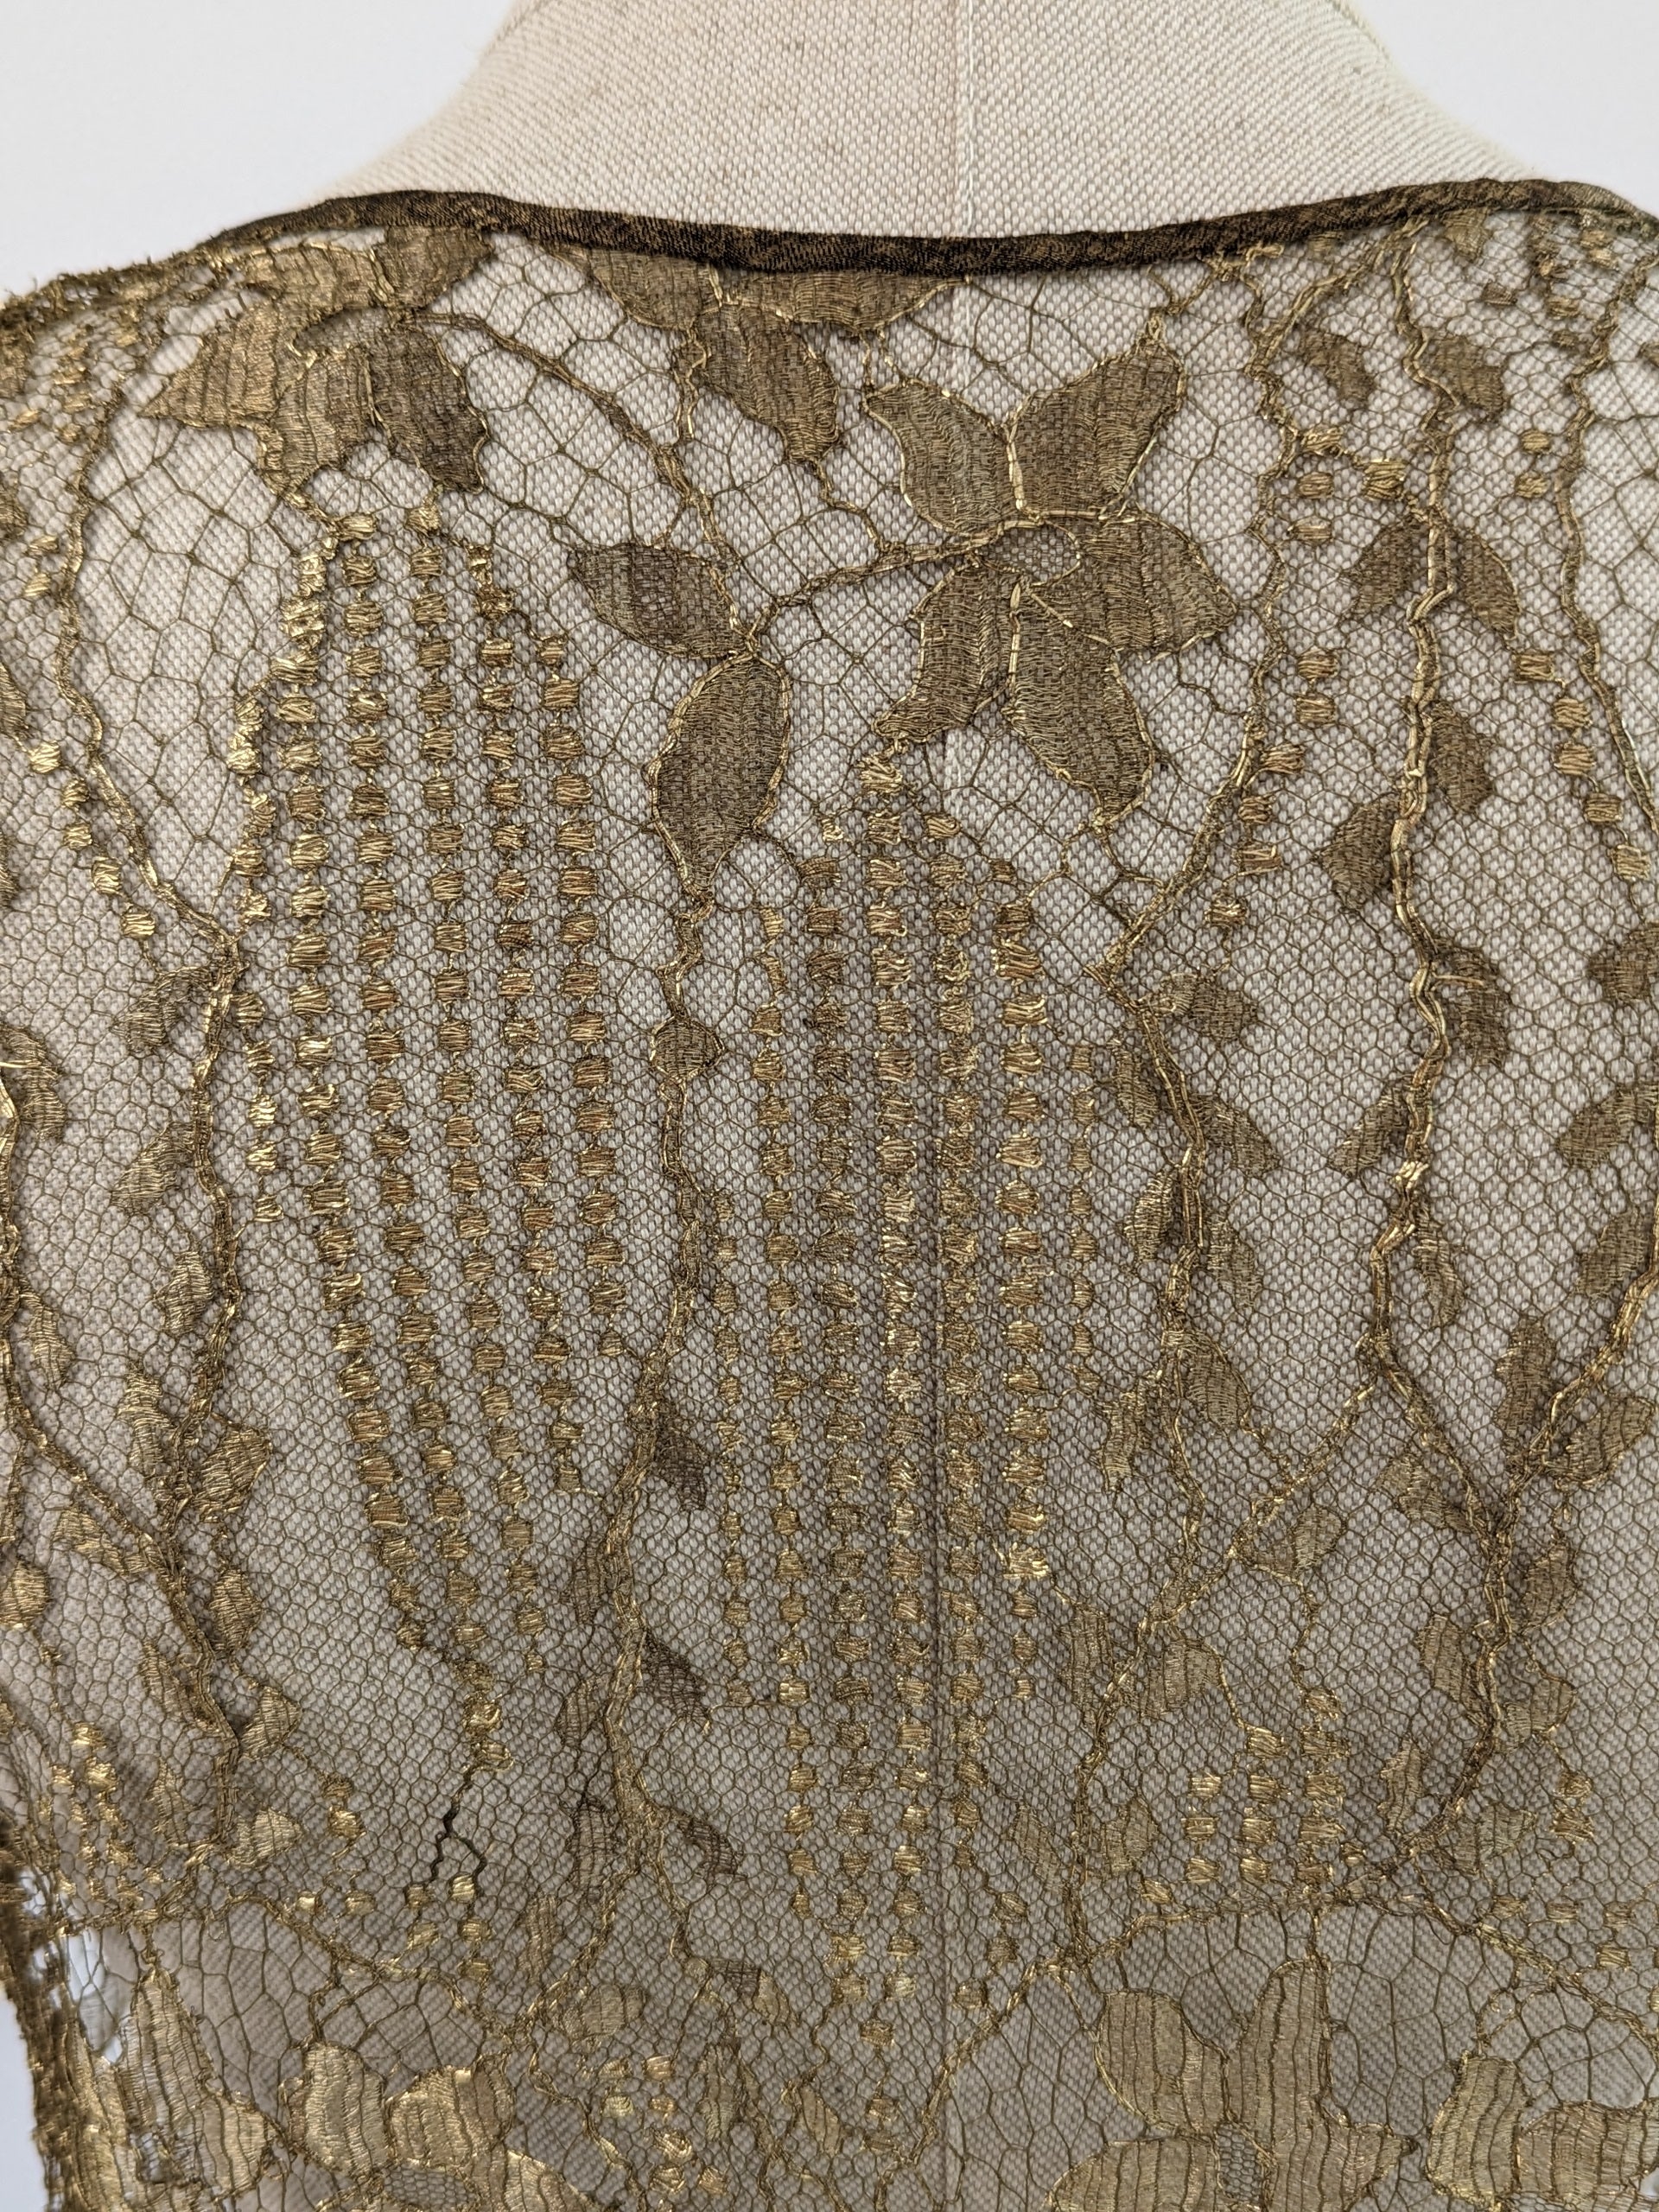 Floral lace patterned gold 1920s dress